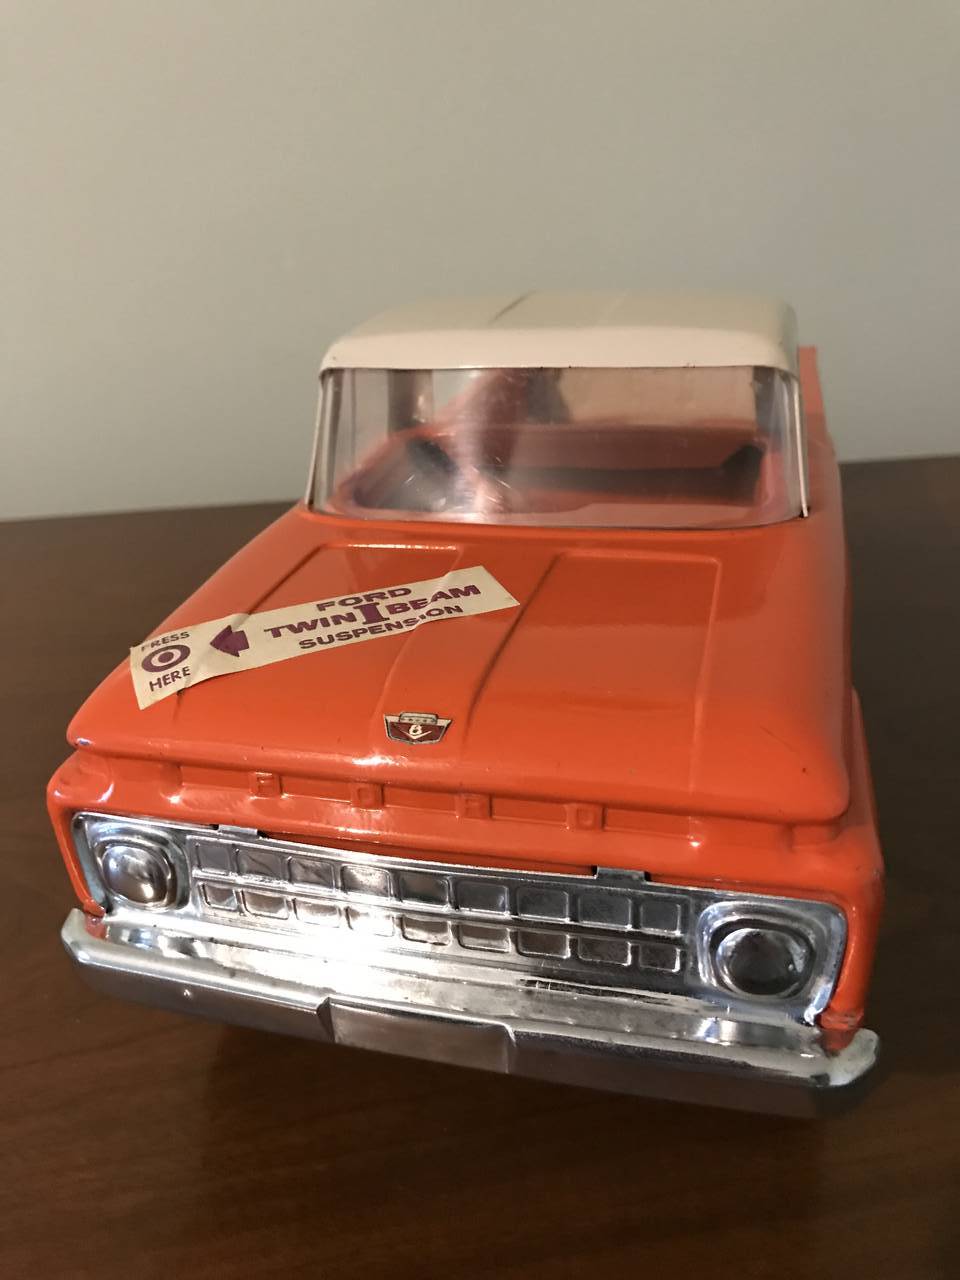 Vintage Nylint Ford collectable toy truck